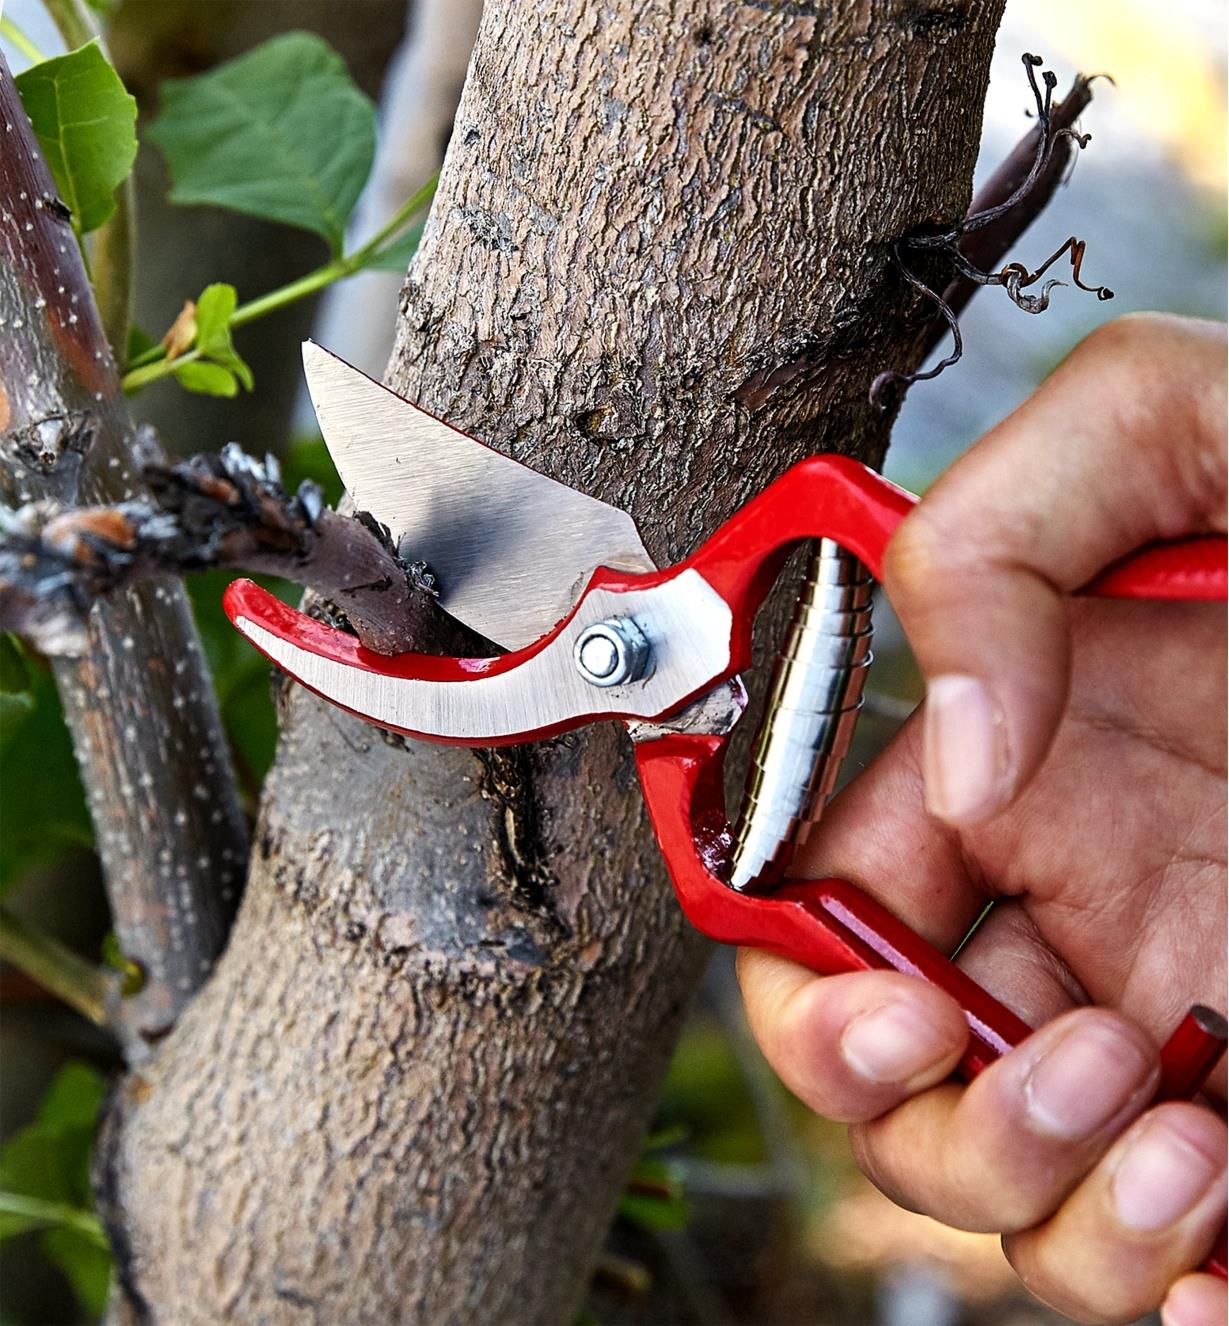 Using the bypass pruners to trim a small branch close to a tree trunk